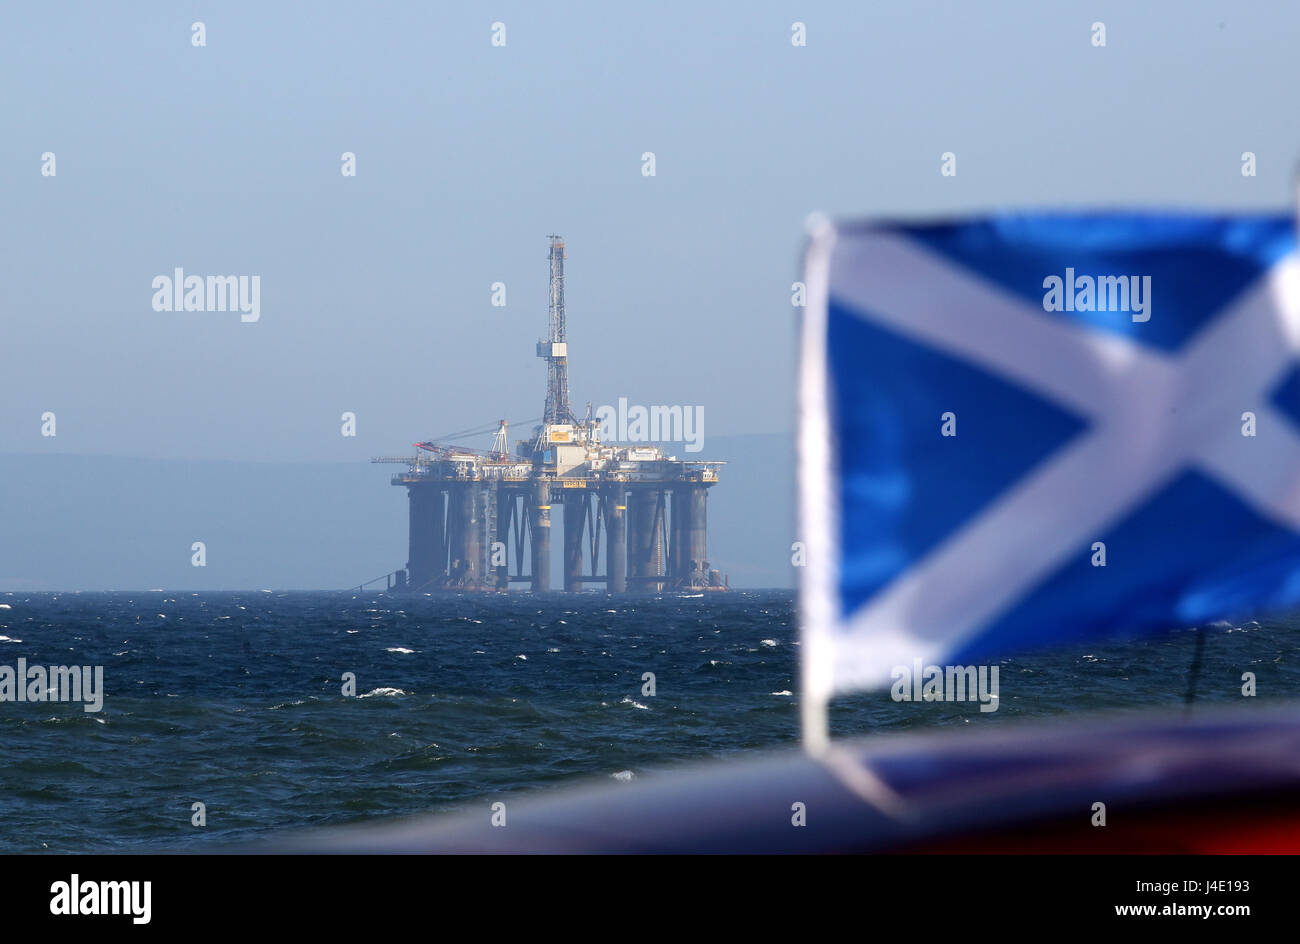 St Andrews, Scotland, UK. 11th May, 2017. Sedco 711 former North Sea oil rig moored in the Firth of Forth with a St Andrews Saltire flag flying in the sea breeze as oil prices continue to fluctuate in Scotlands interest Credit: Allan Milligan/Alamy Live News Stock Photo